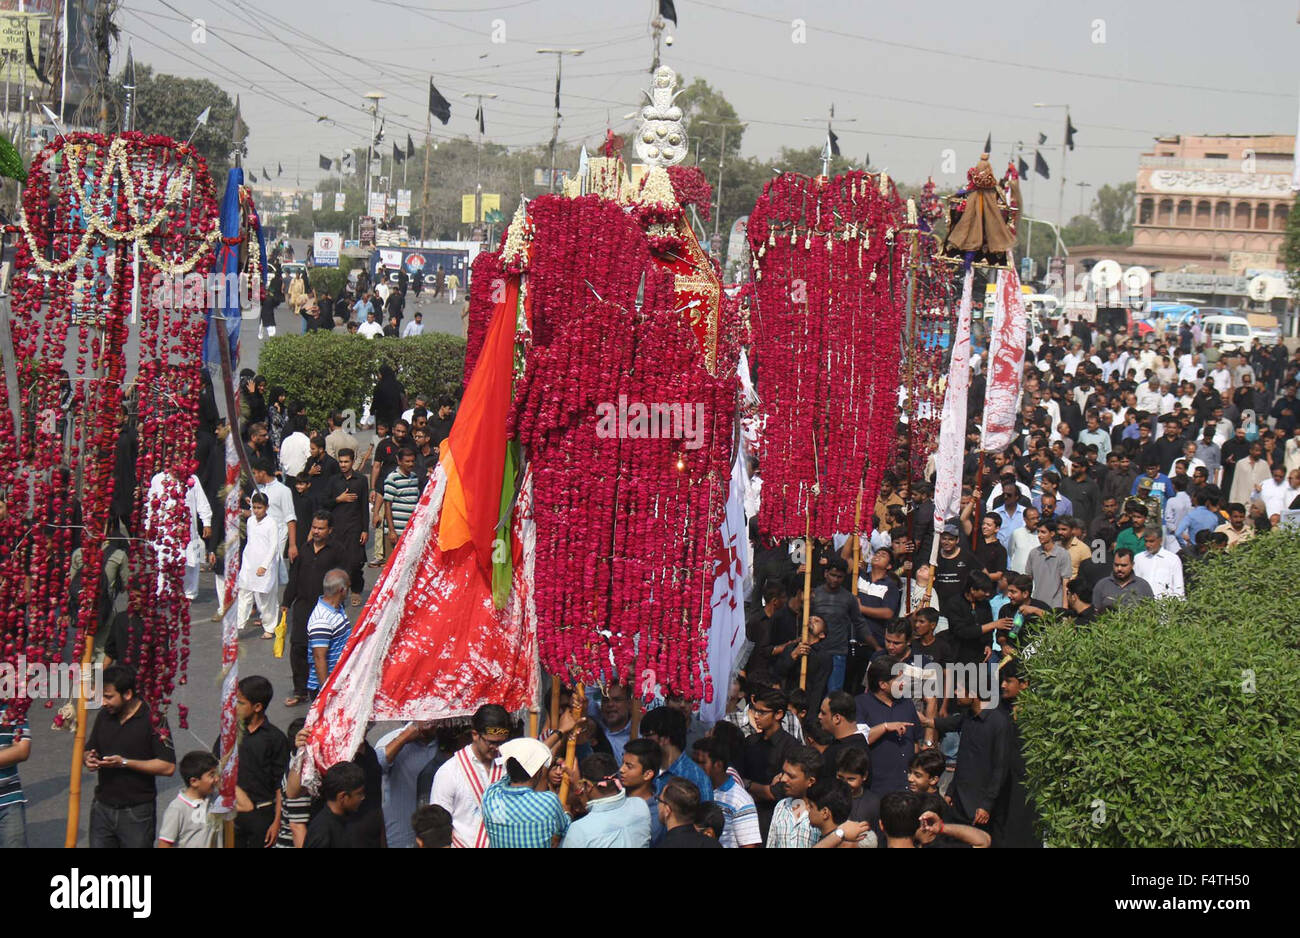 Devotees of Hazrat Imam Hussain (A.S) are participating in mourning procession in connection of 8th Moharram-ul-Haram, passing through M.A Jinnah Road in Karachi on Thursday, October 22, 2015. Stock Photo